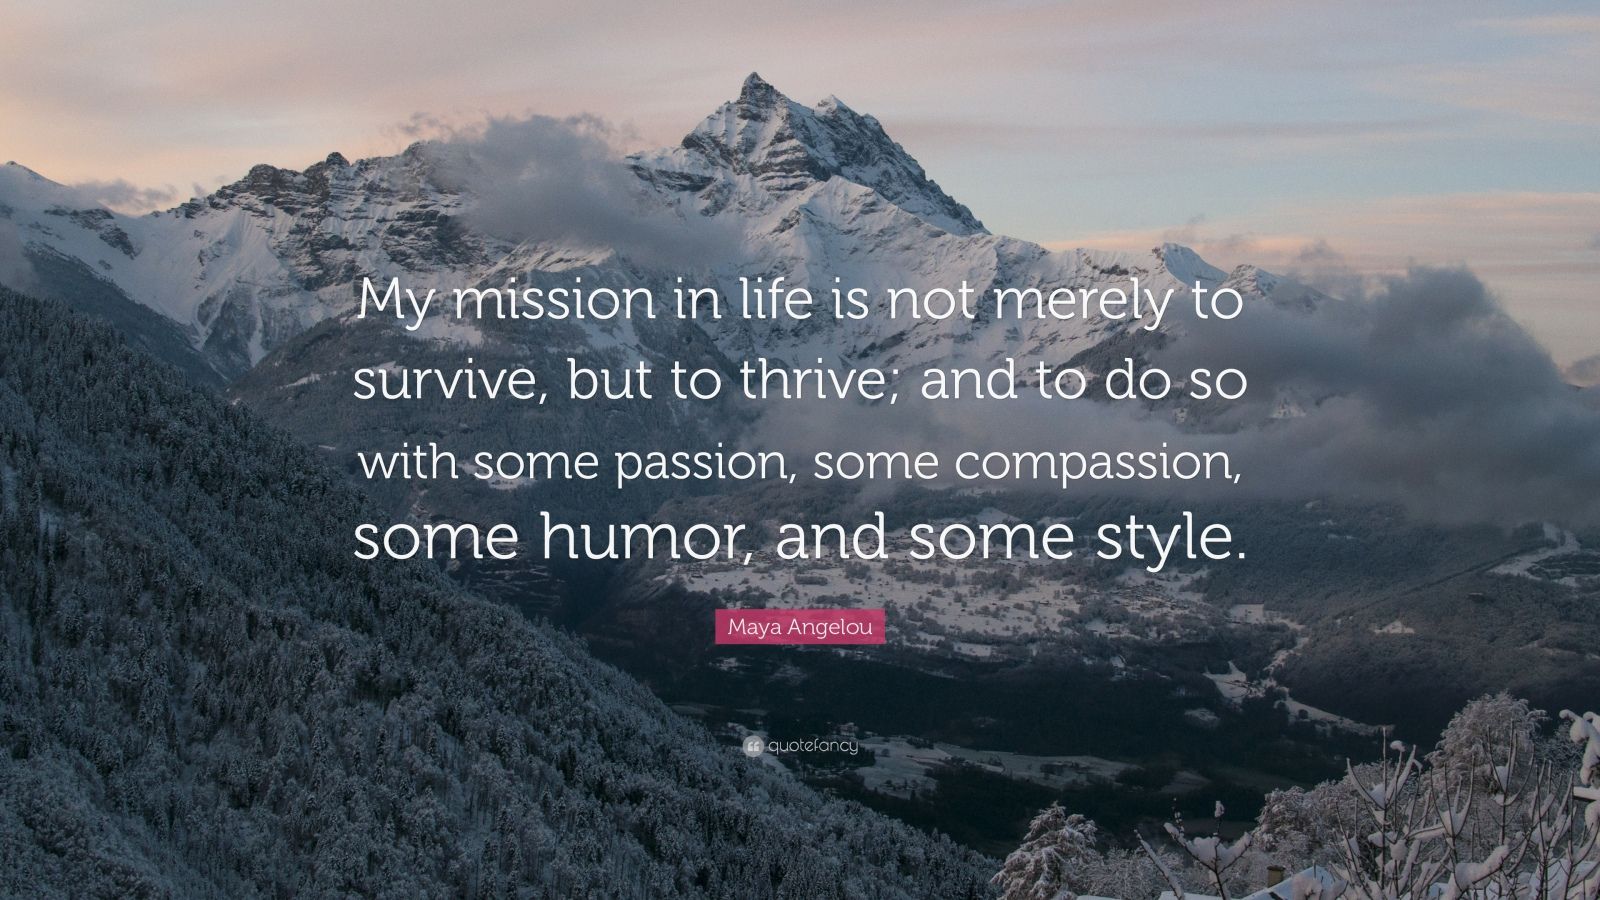 Maya Angelou Quote: “My mission in life is not merely to survive, but